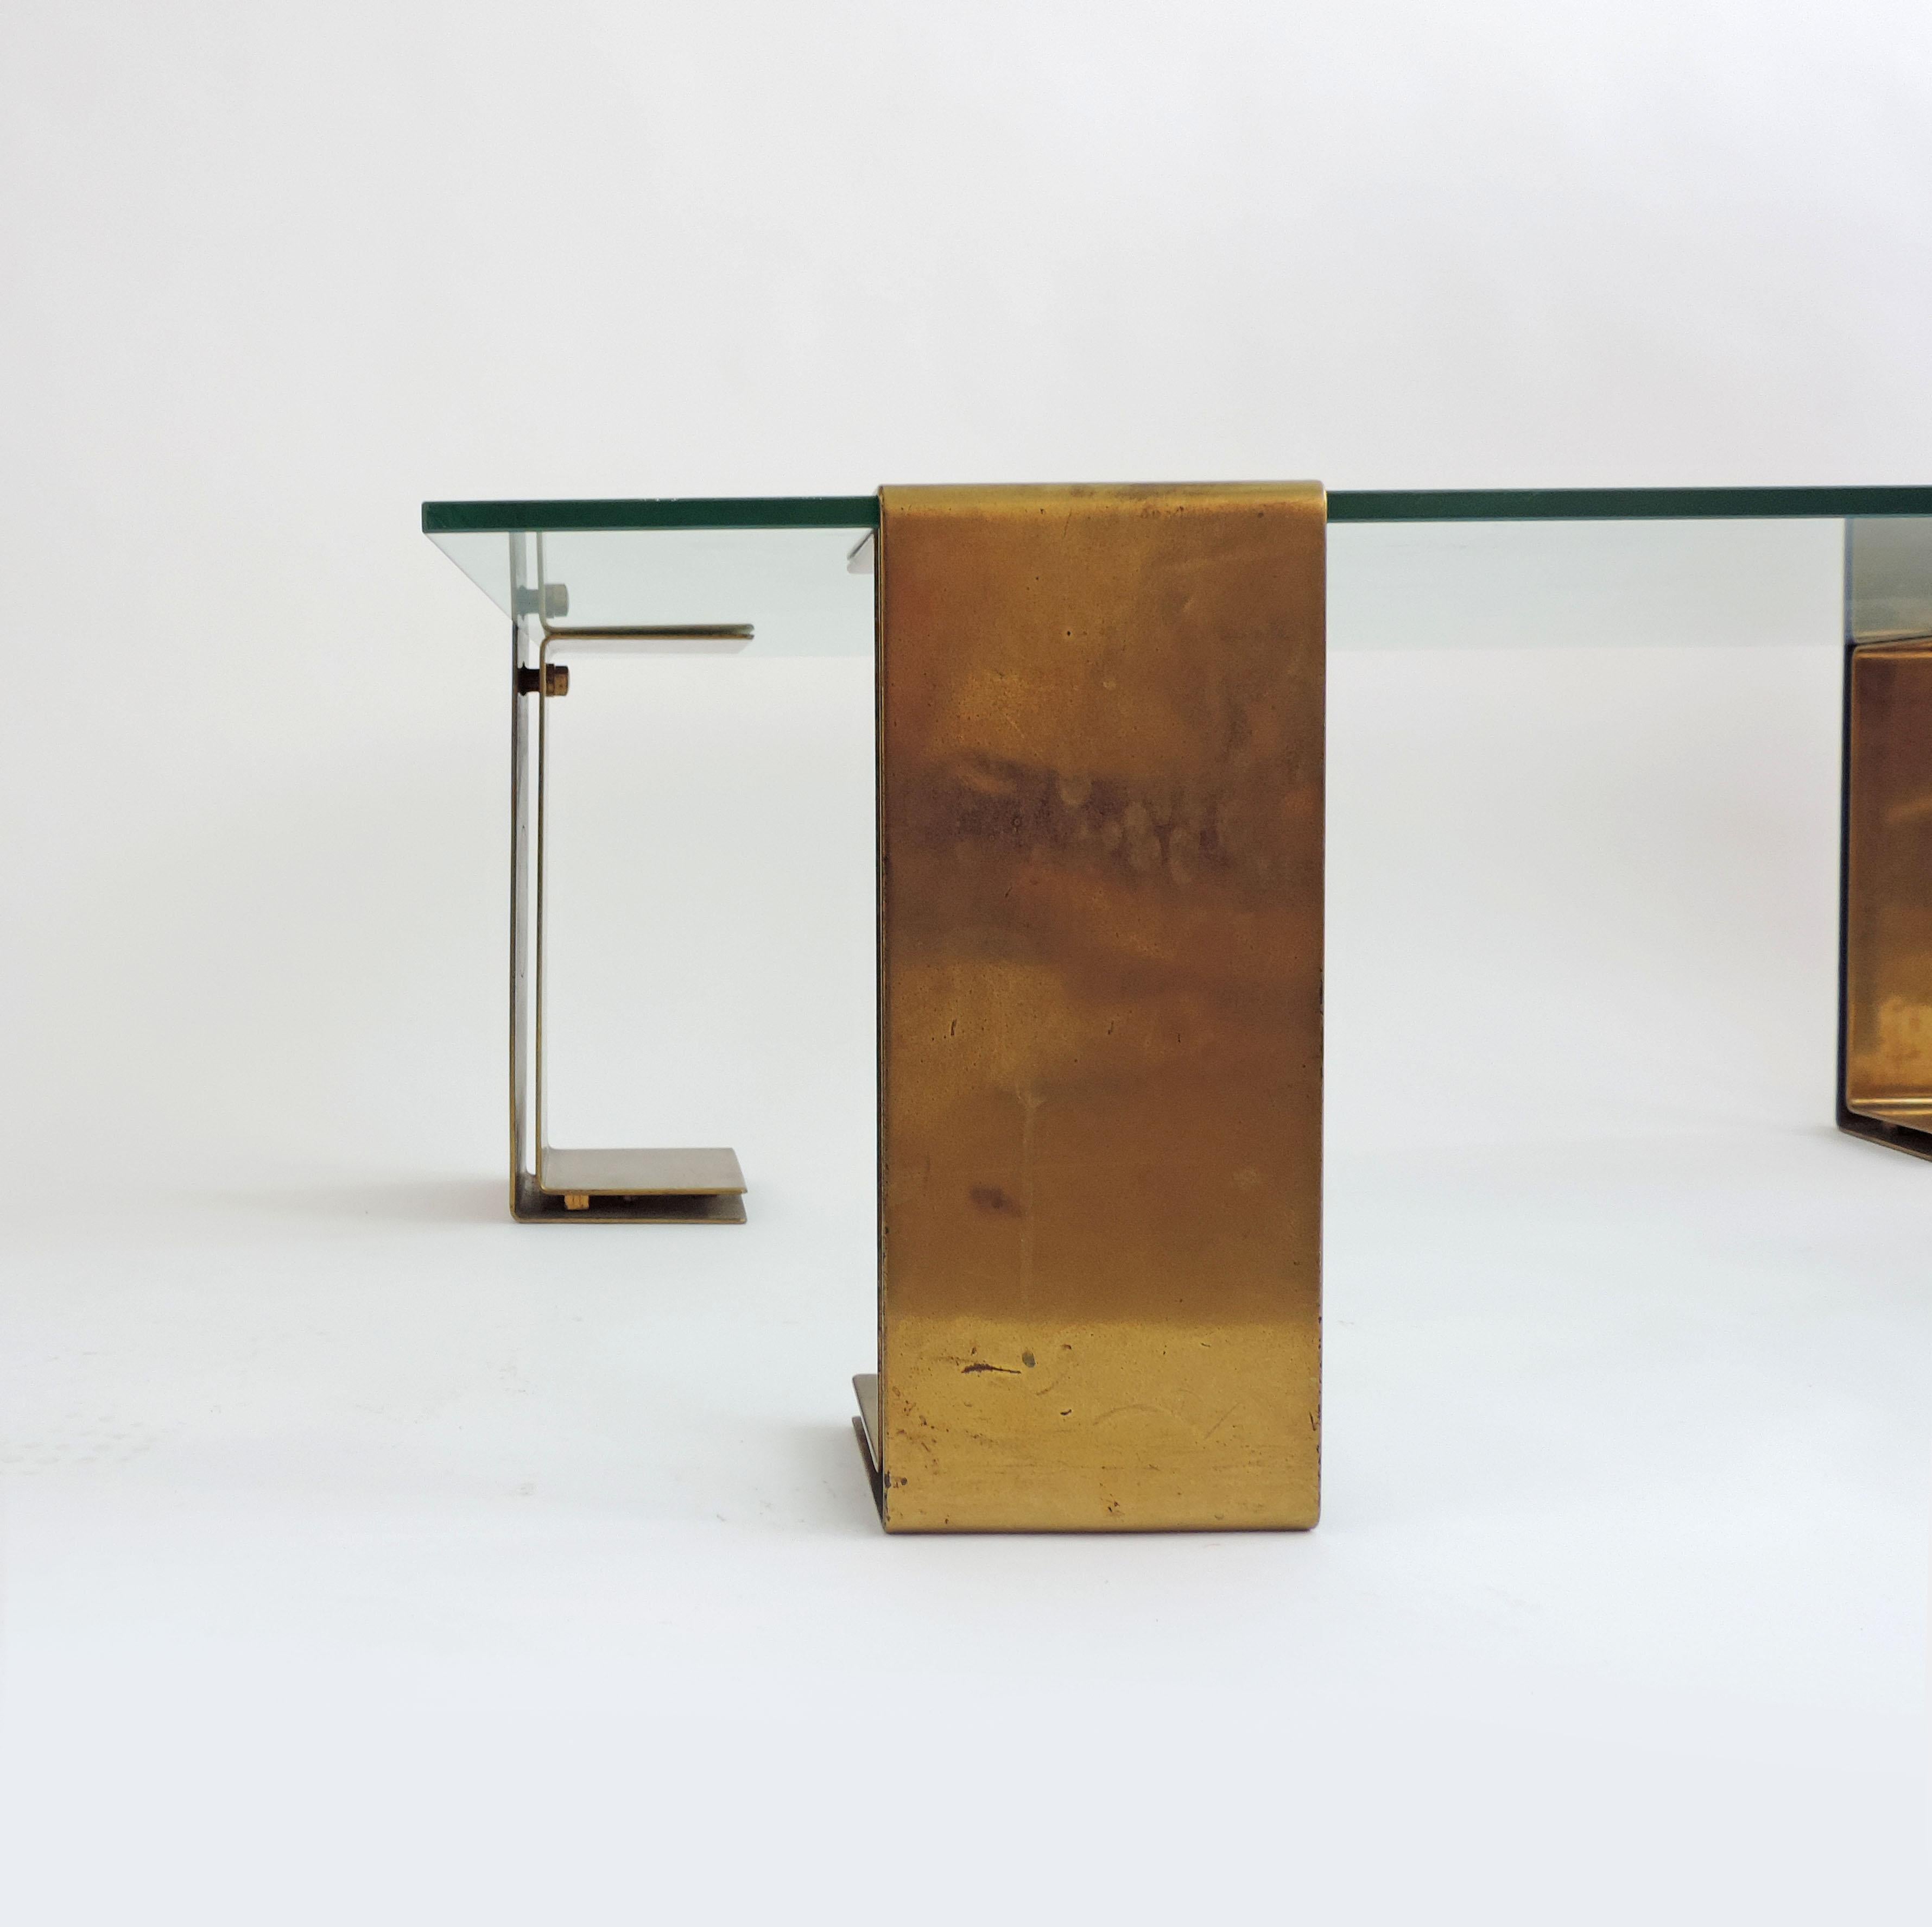 Spectacular Italian 1970s coffee table.
Four heavy brass feet which can be placed in different positions.